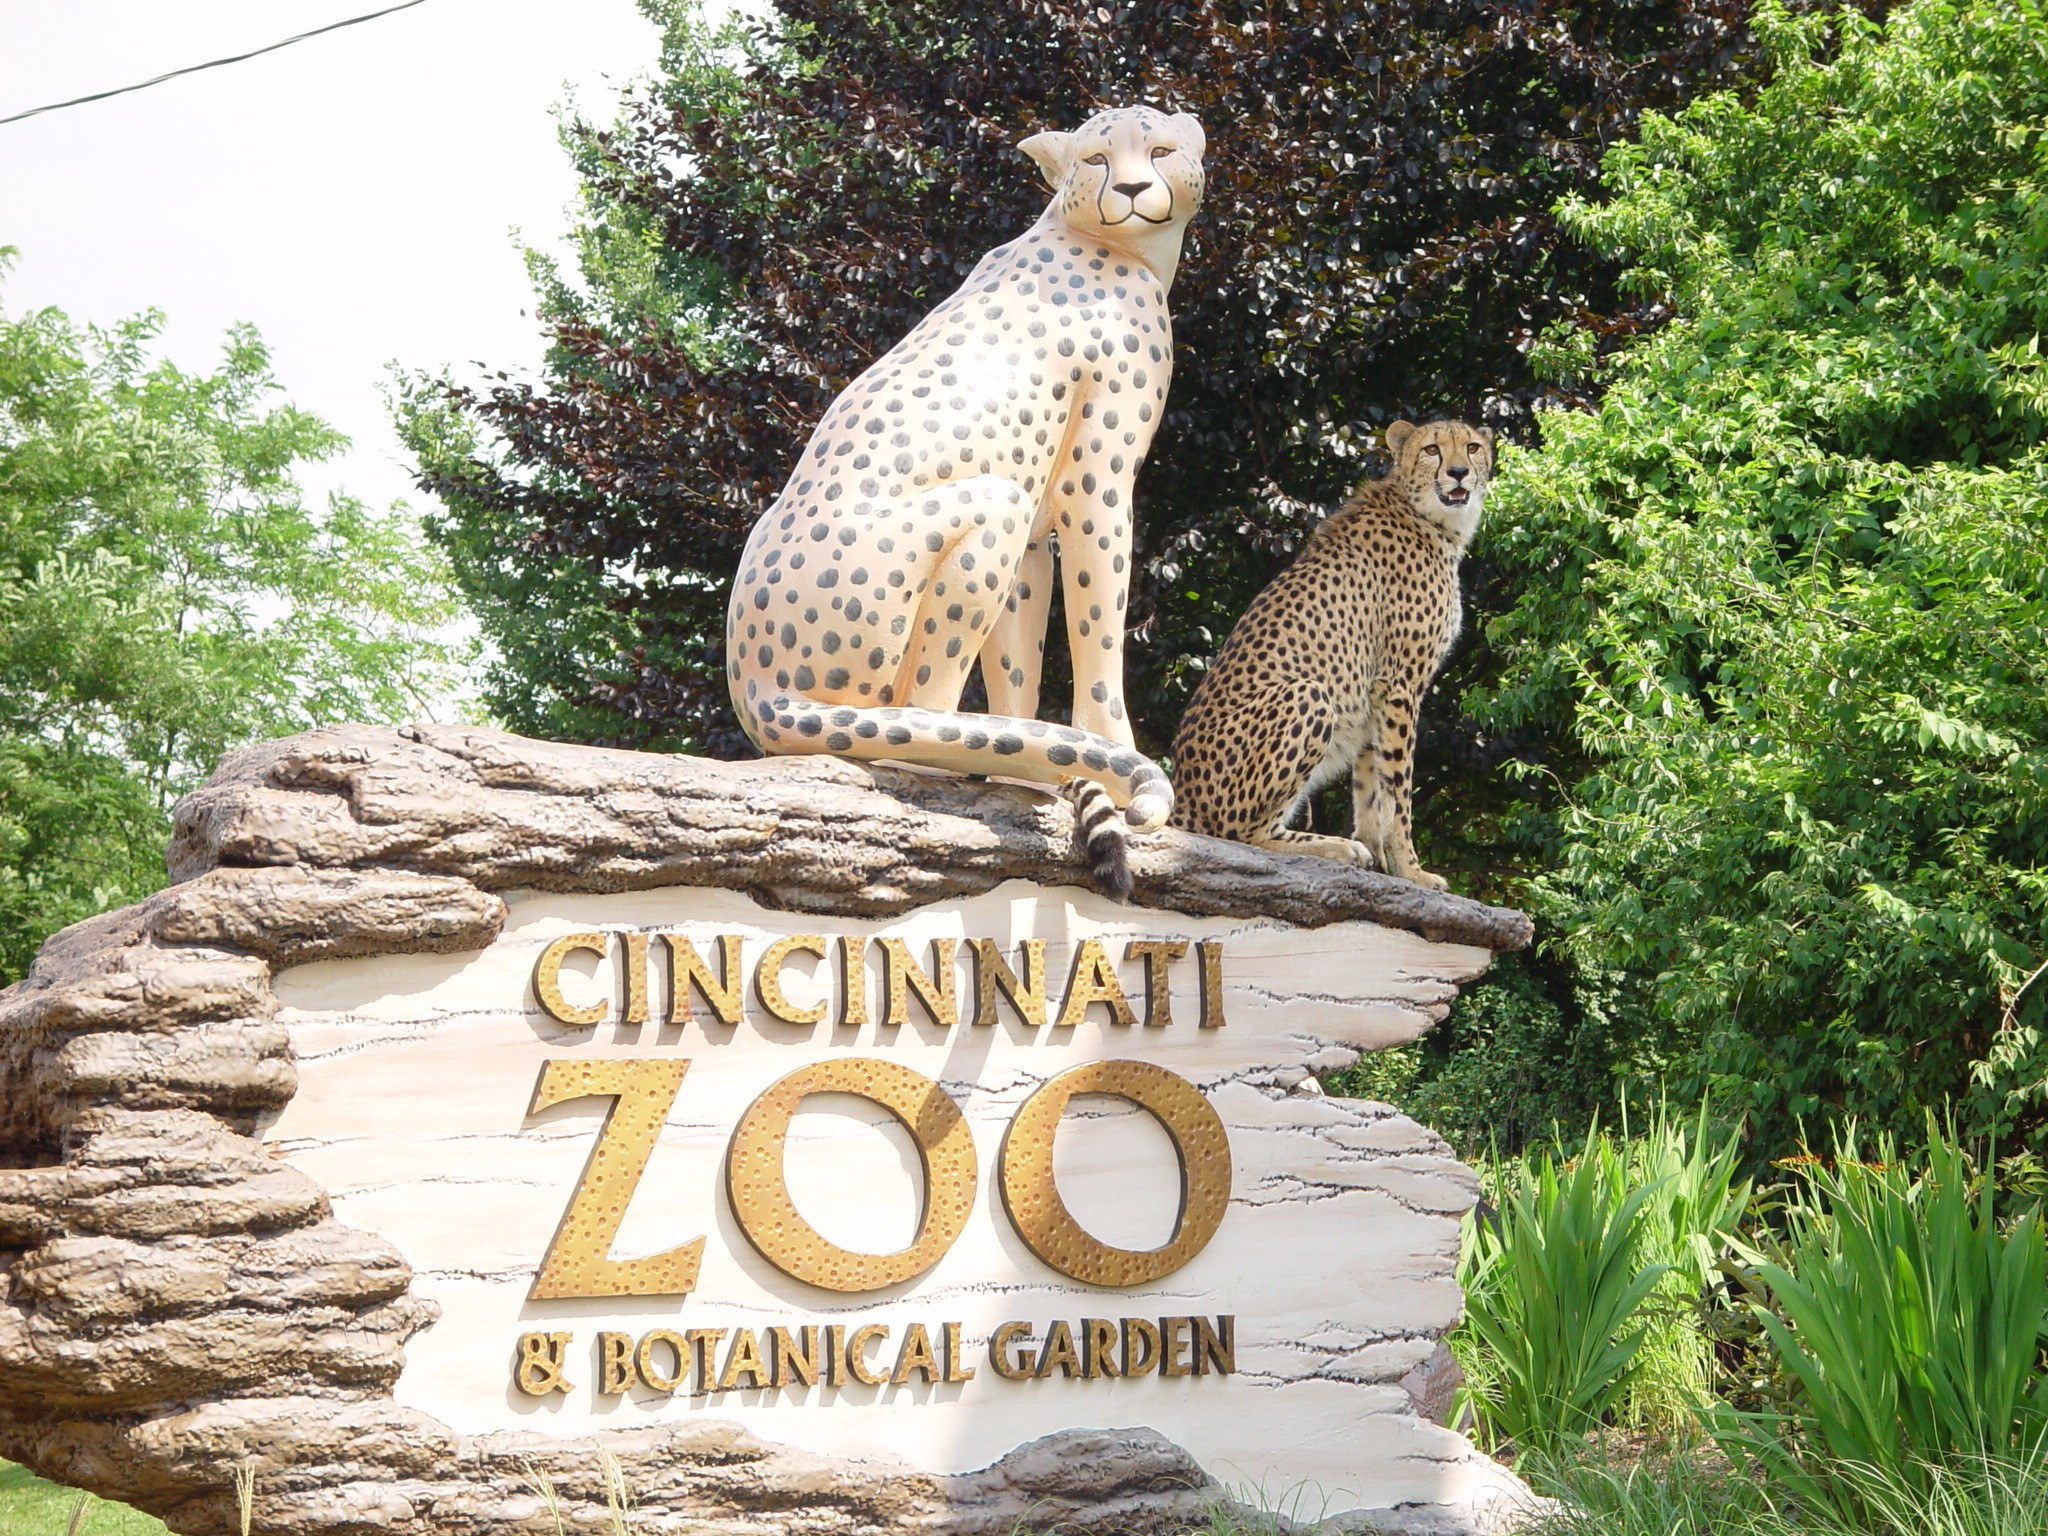 Family Fun at the Cincinnati Zoo Stories From the Playground